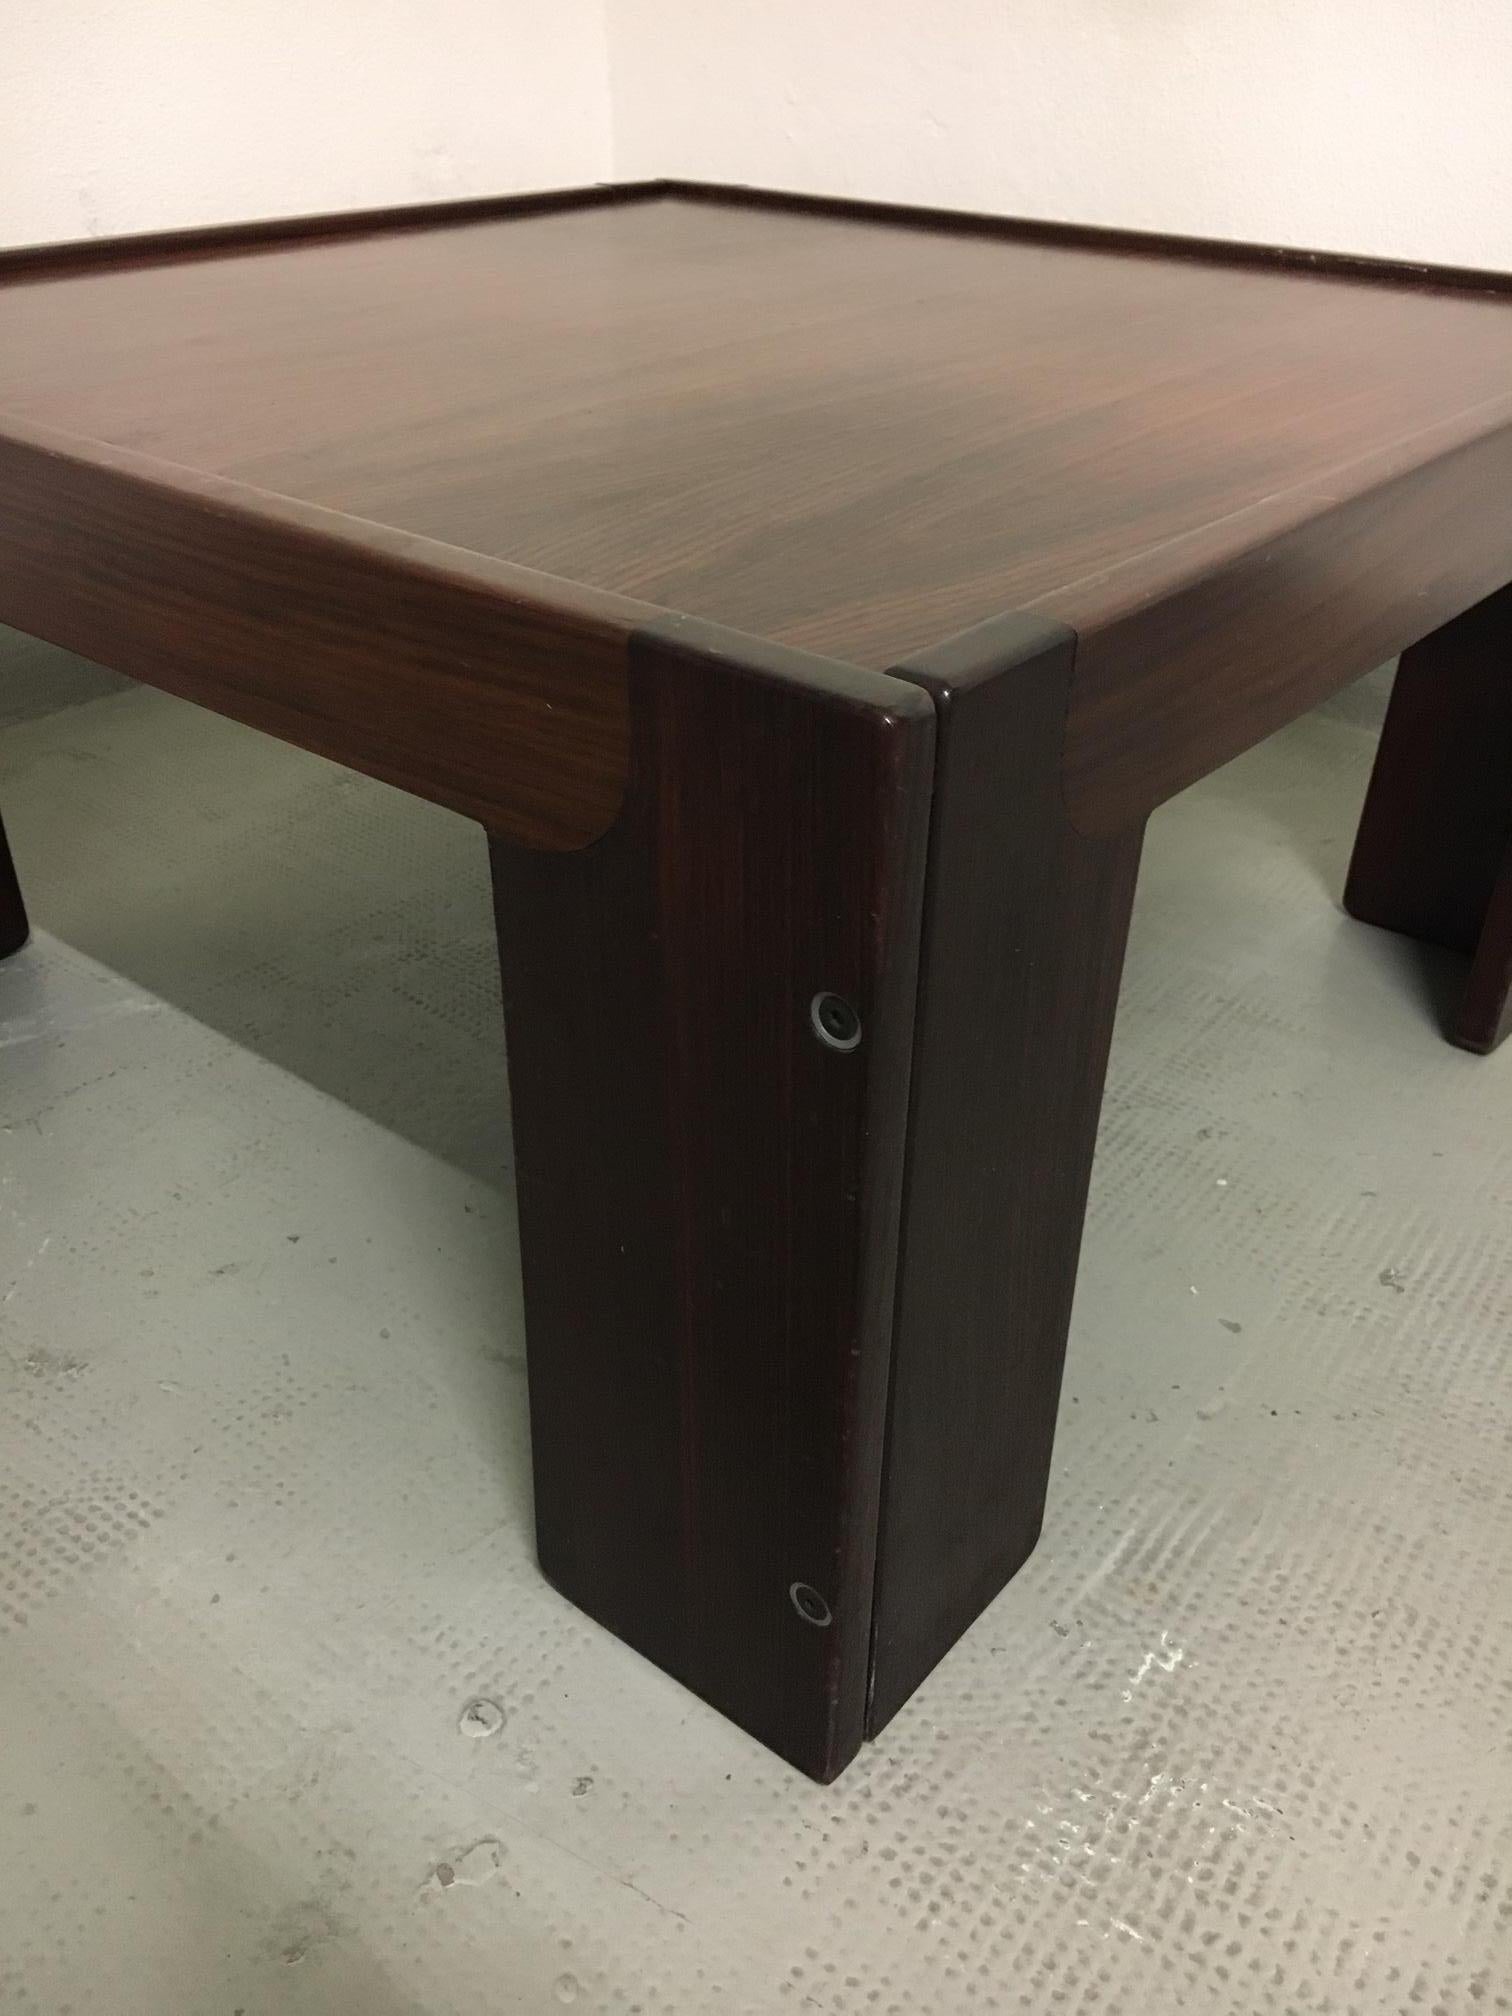 Rosewood side or coffee model 771 by Afra & Tobia Scarpa produced by Cassina, Italy, ca. 1965
Measures: 75 x 75 x 38 cm
Switchable rosewood table top
Manufacturer label
Very good condition, no discoloration.

 